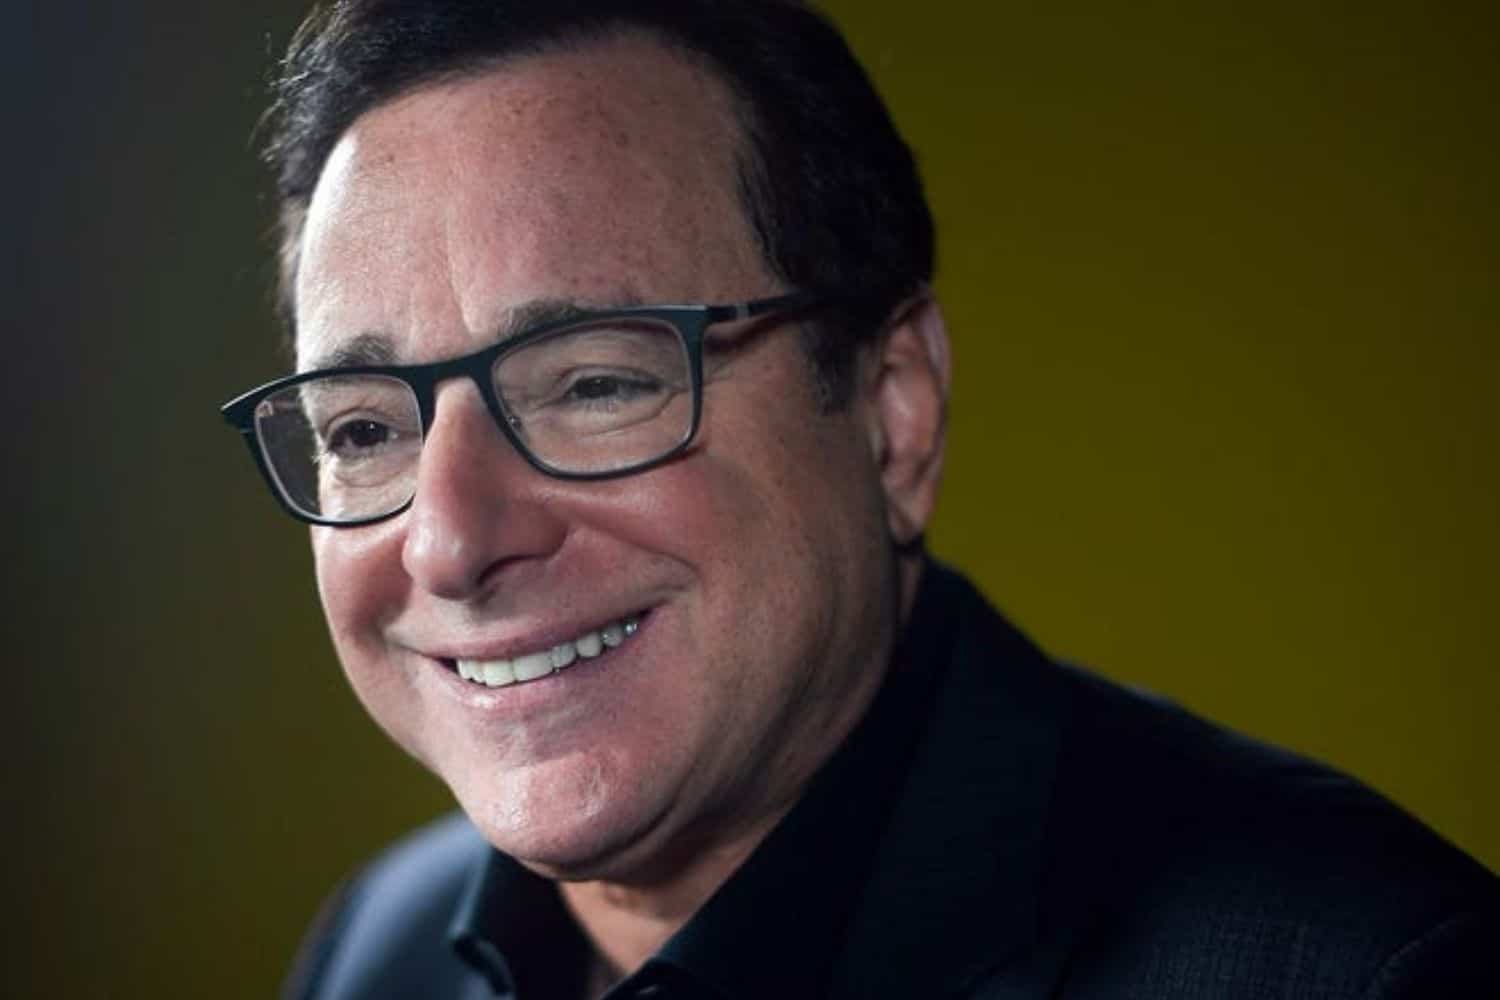 Bob Saget's cause of death confirmed - a blow to the head